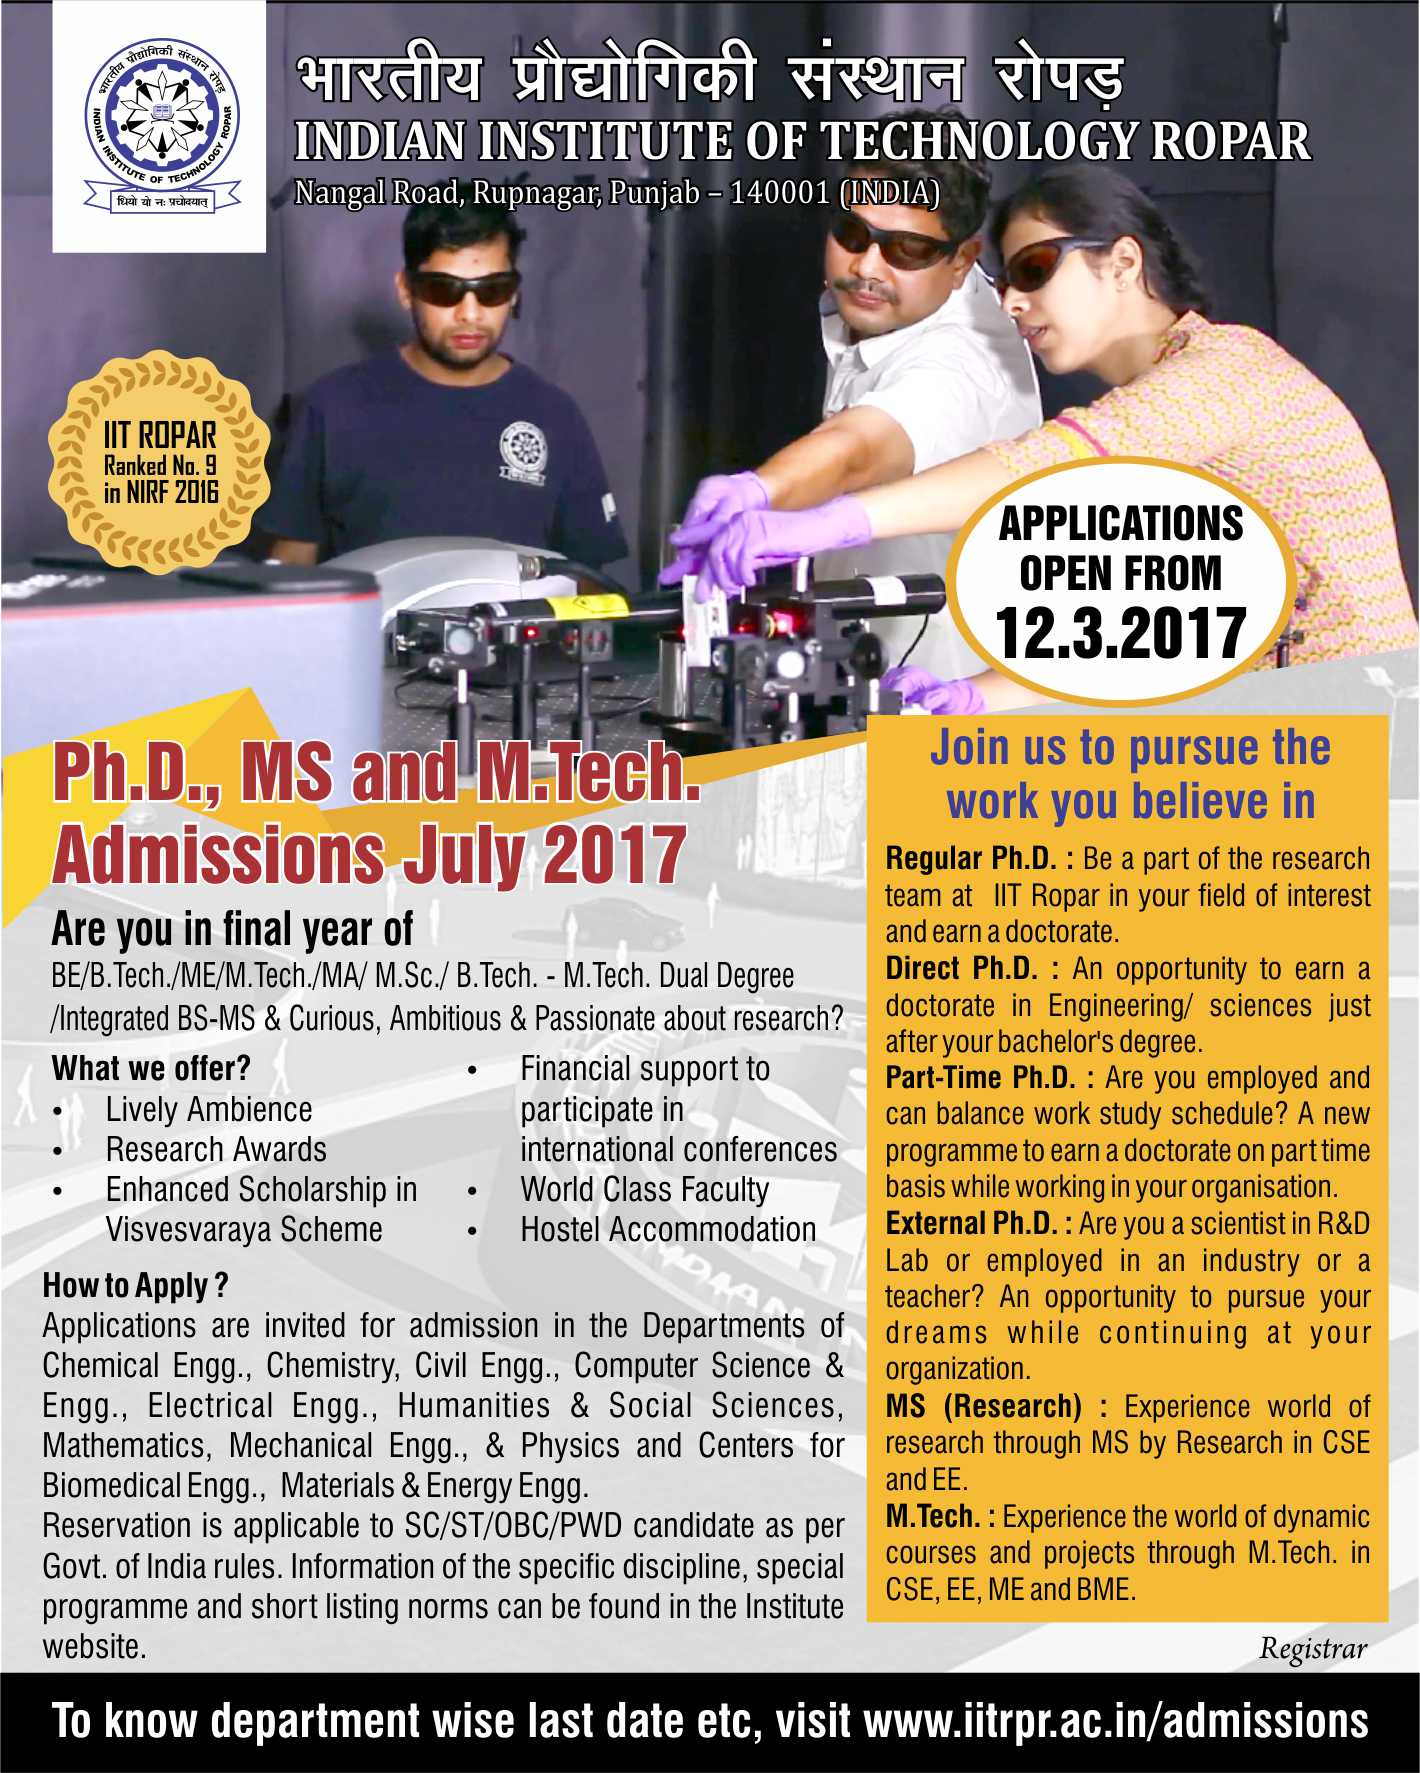 IIT Kharagpur - Master and Doctoral (PhD) Programs for International  Students IIT Kharagpur invites applications for Admissions, open for  International Students to enroll for Master and Doctoral (PhD) Programs at  IIT Kharagpur